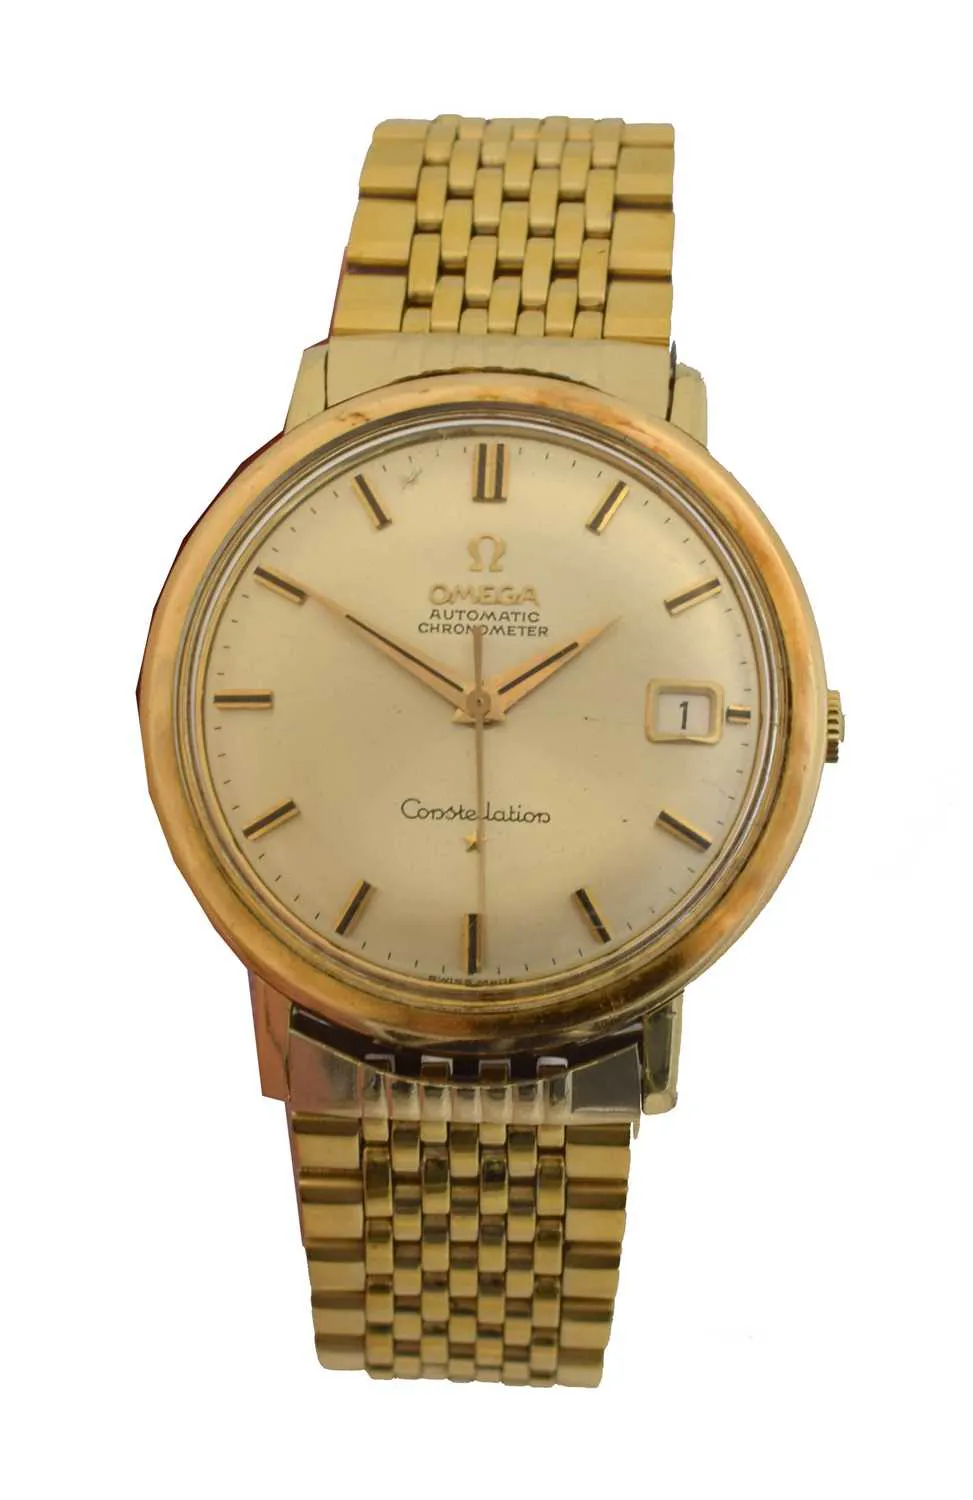 Omega Constellation 35mm Stainless steel and gold-plated